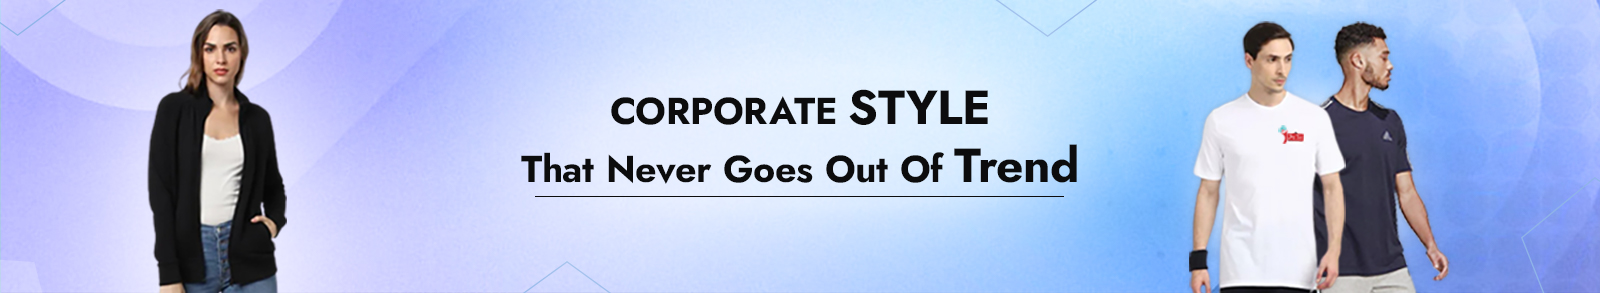 Corporate Style That Never Goes Out Of Trend